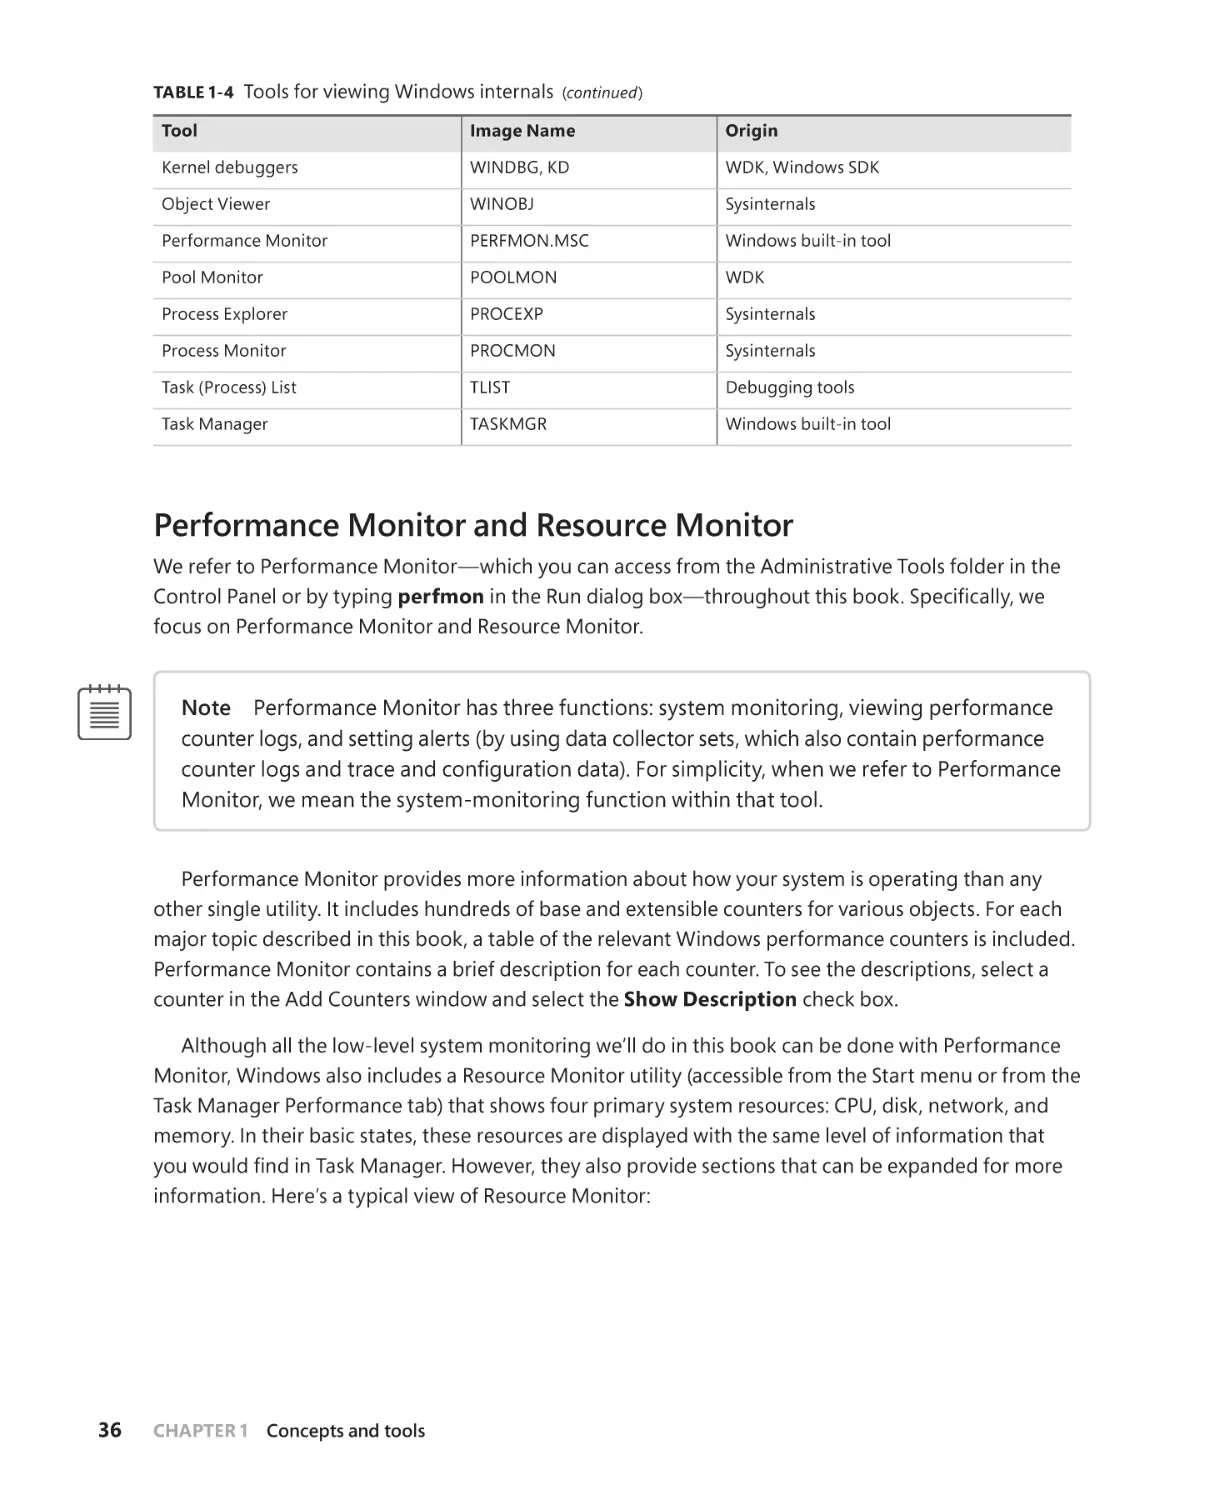 Performance Monitor and Resource Monitor